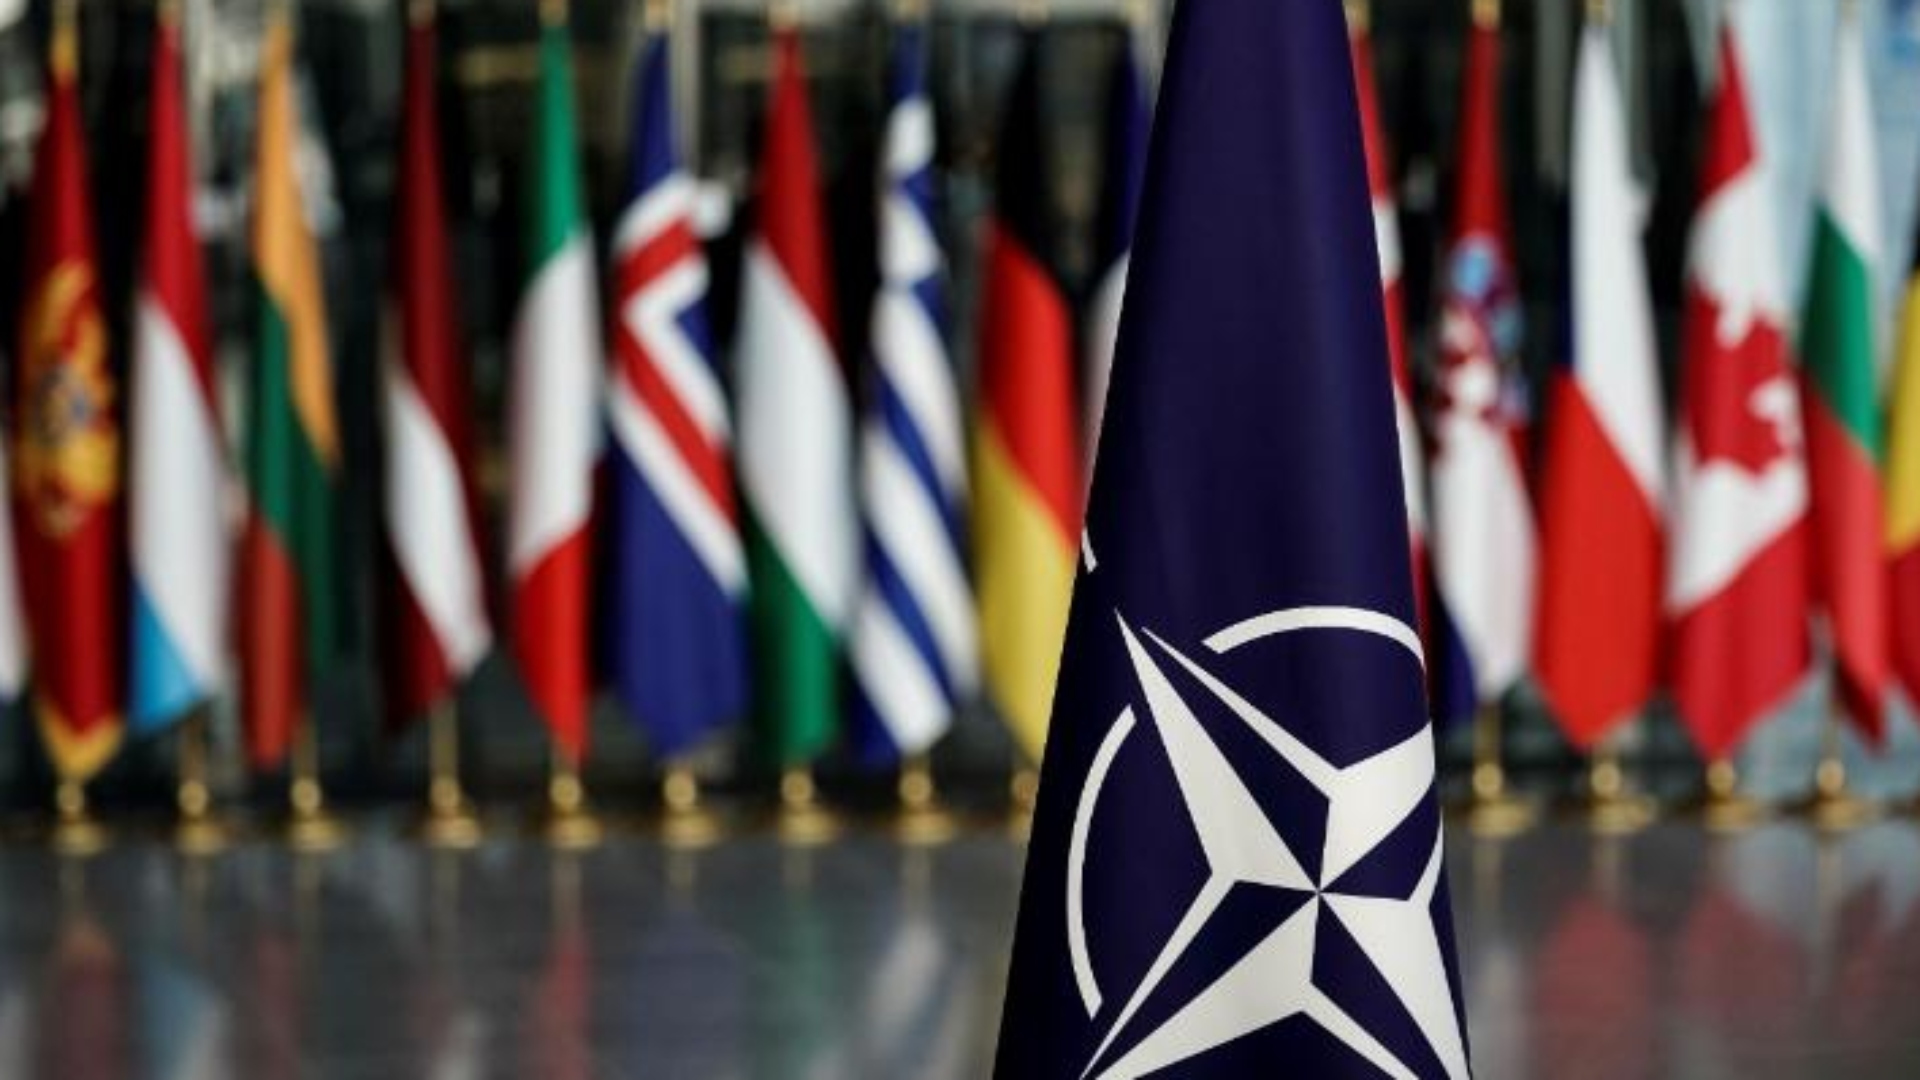 Russia suspends NATO mission after staff expelled